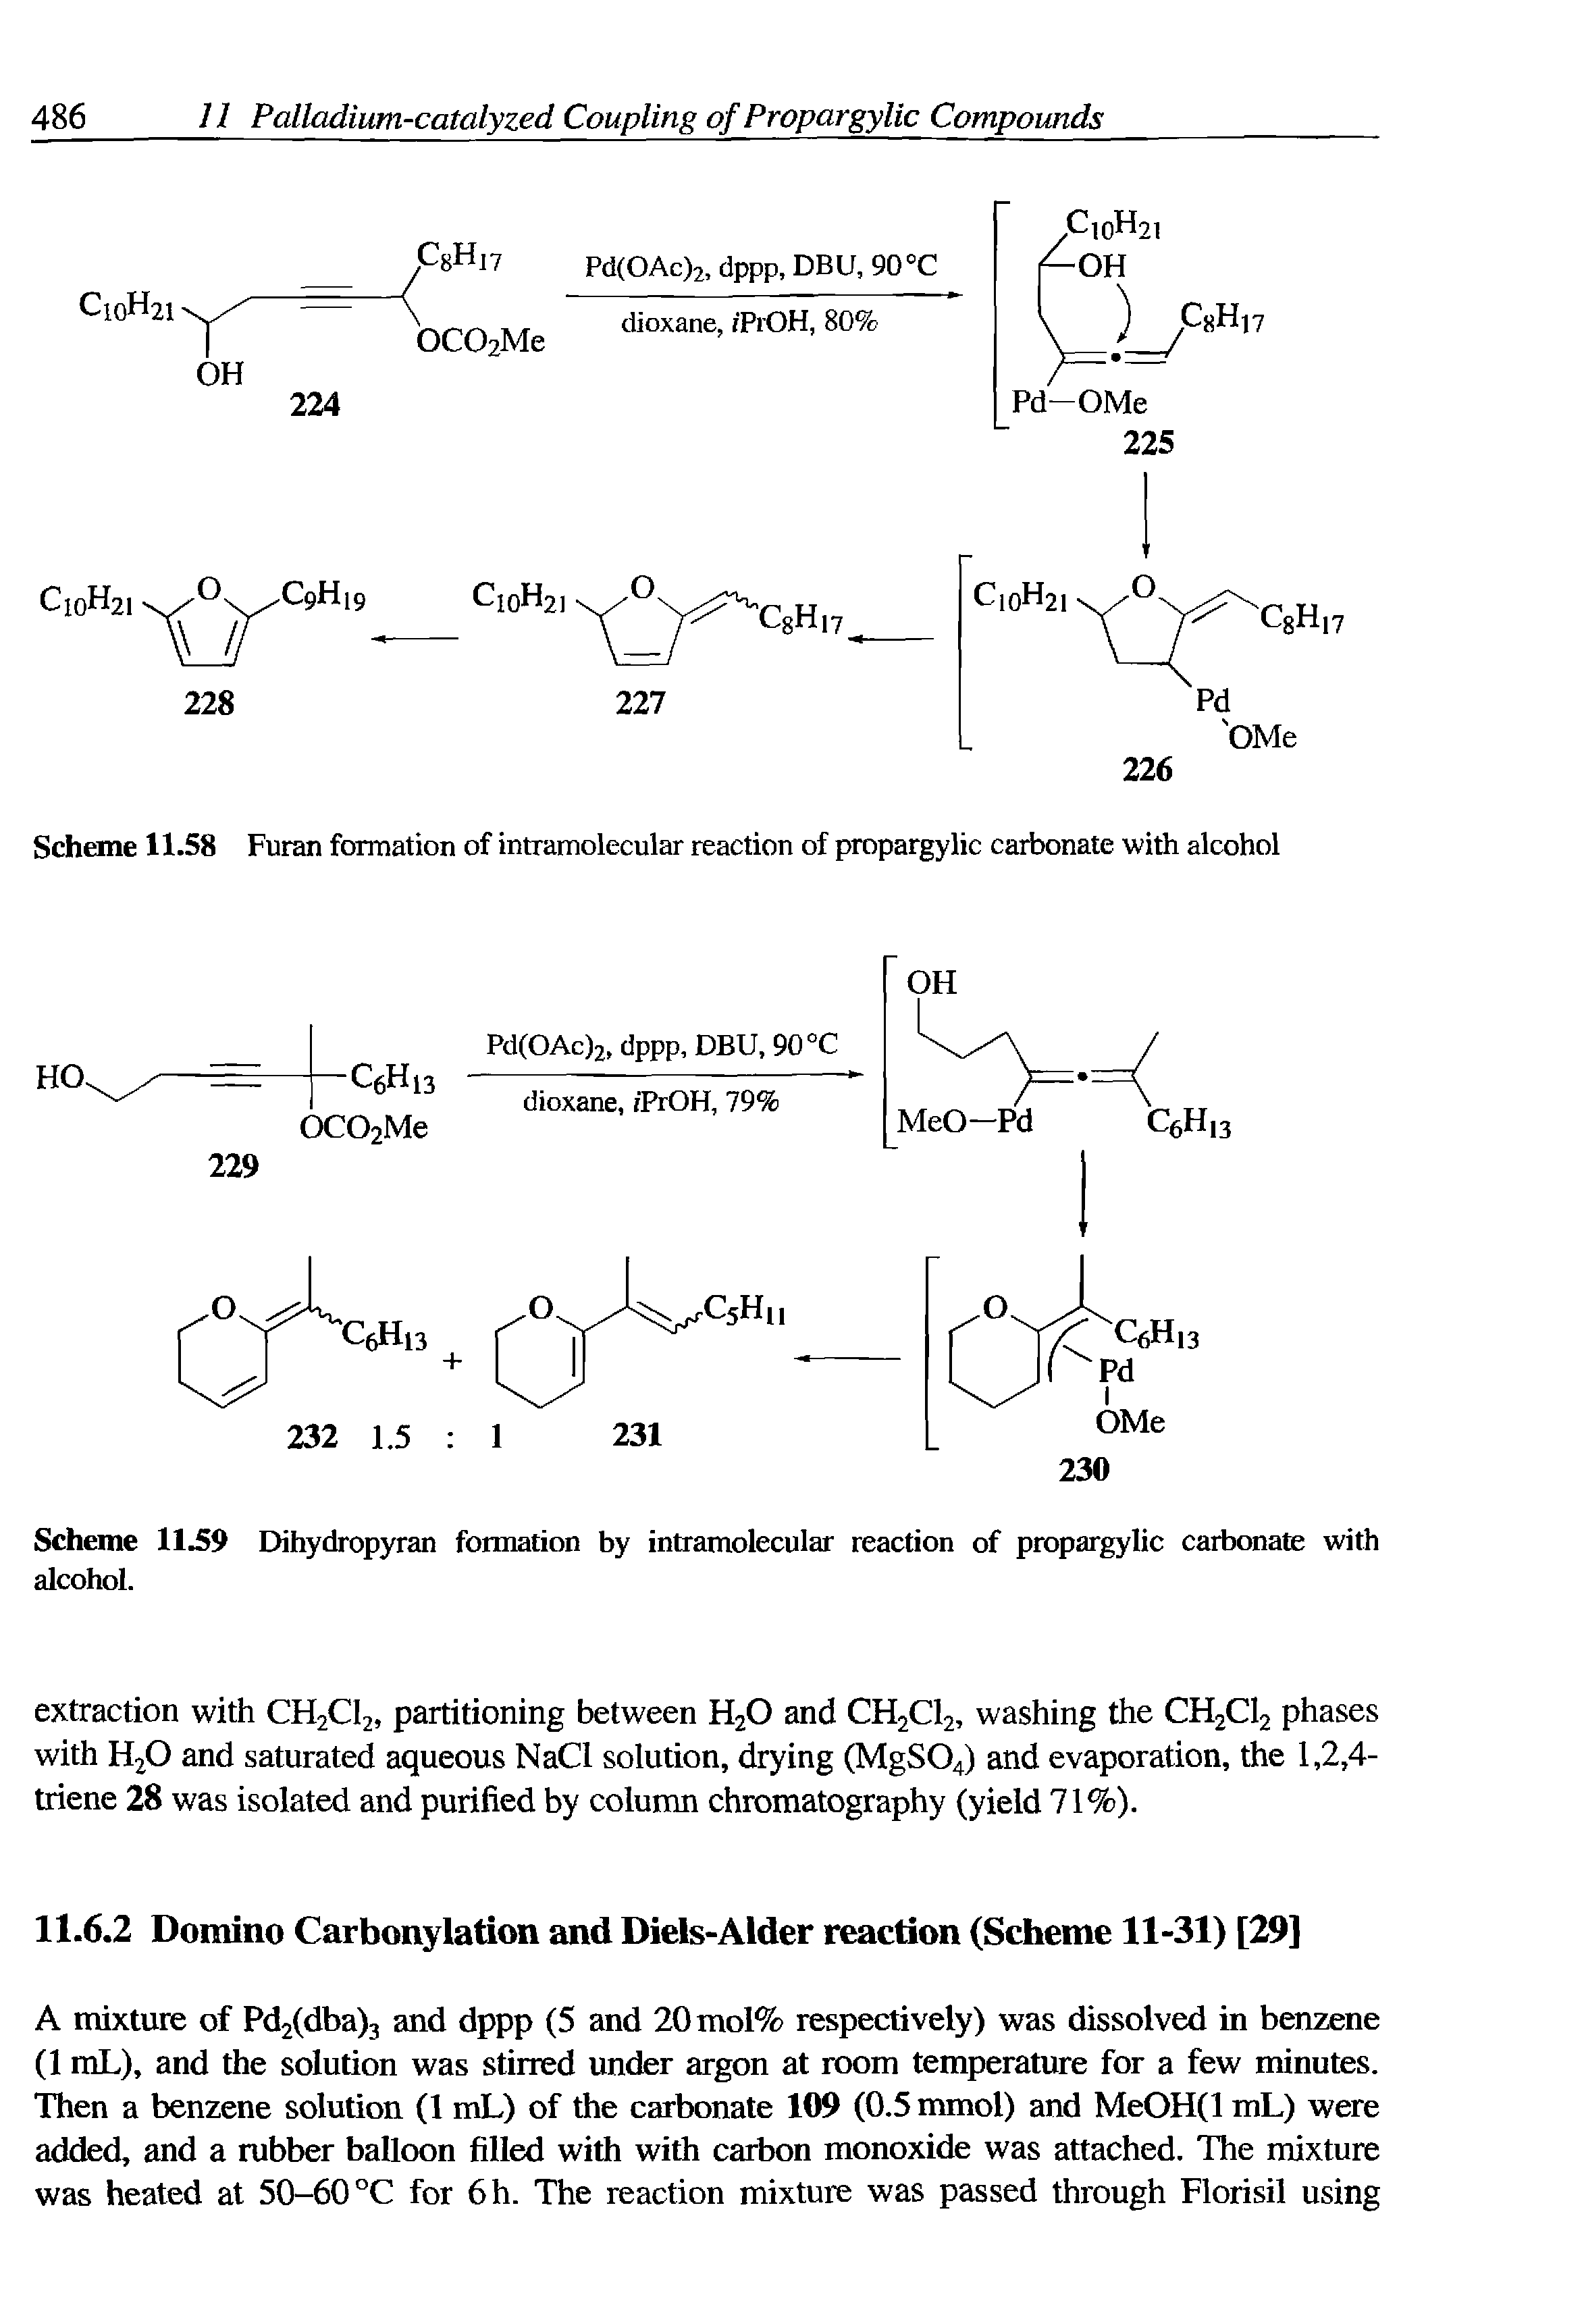 Scheme 11.58 Furan formation of intramolecular reaction of propargylic carbonate with alcohol...